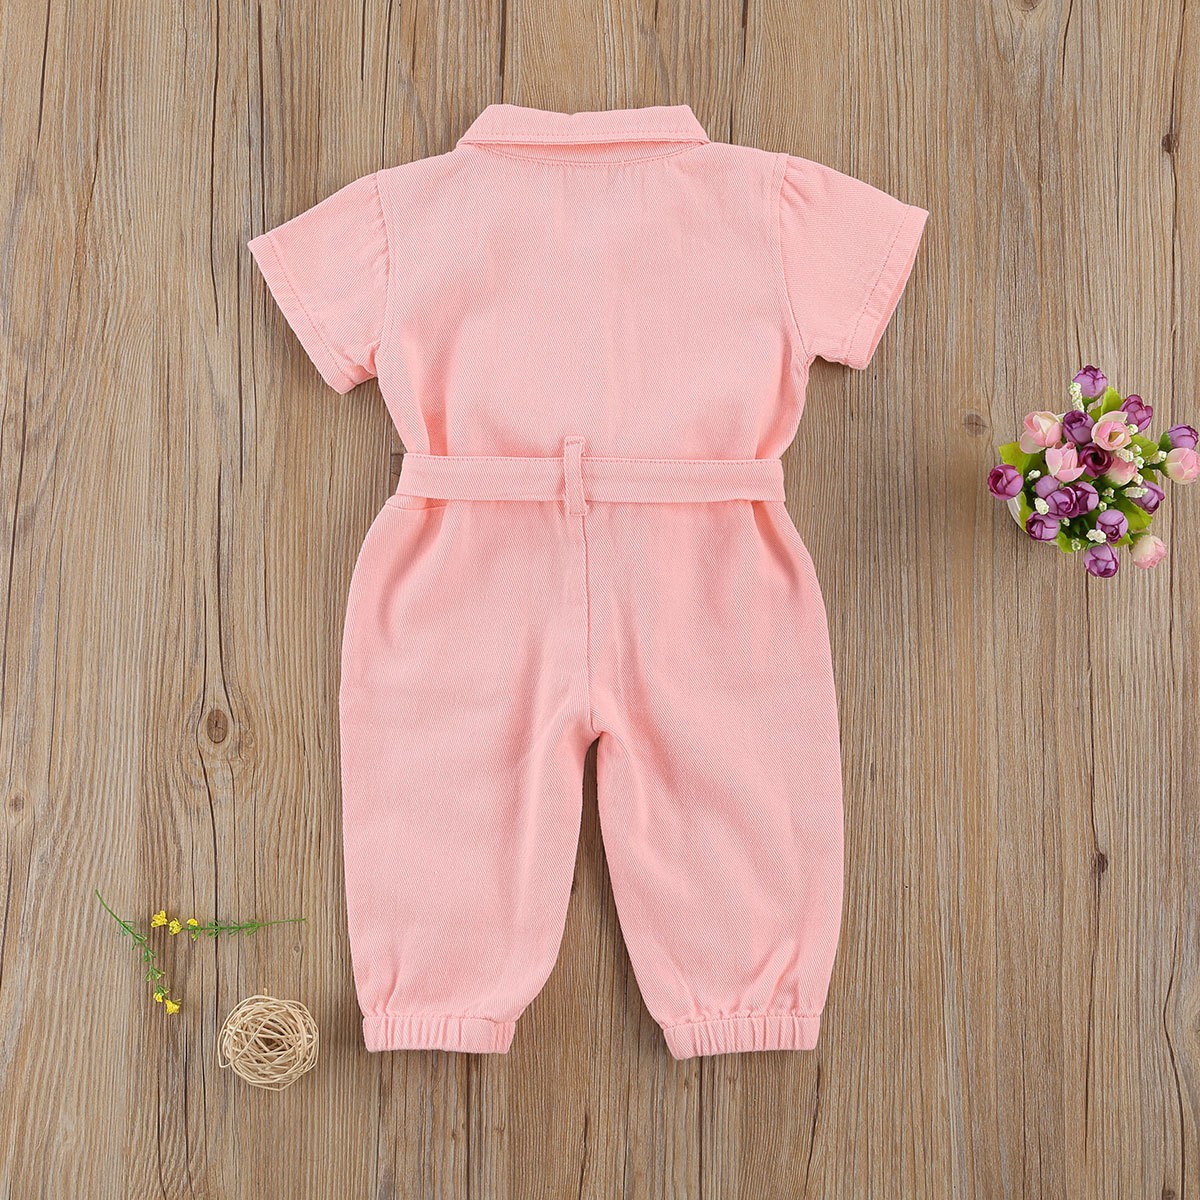 Customized and purchased spring solid color baby women's dress set